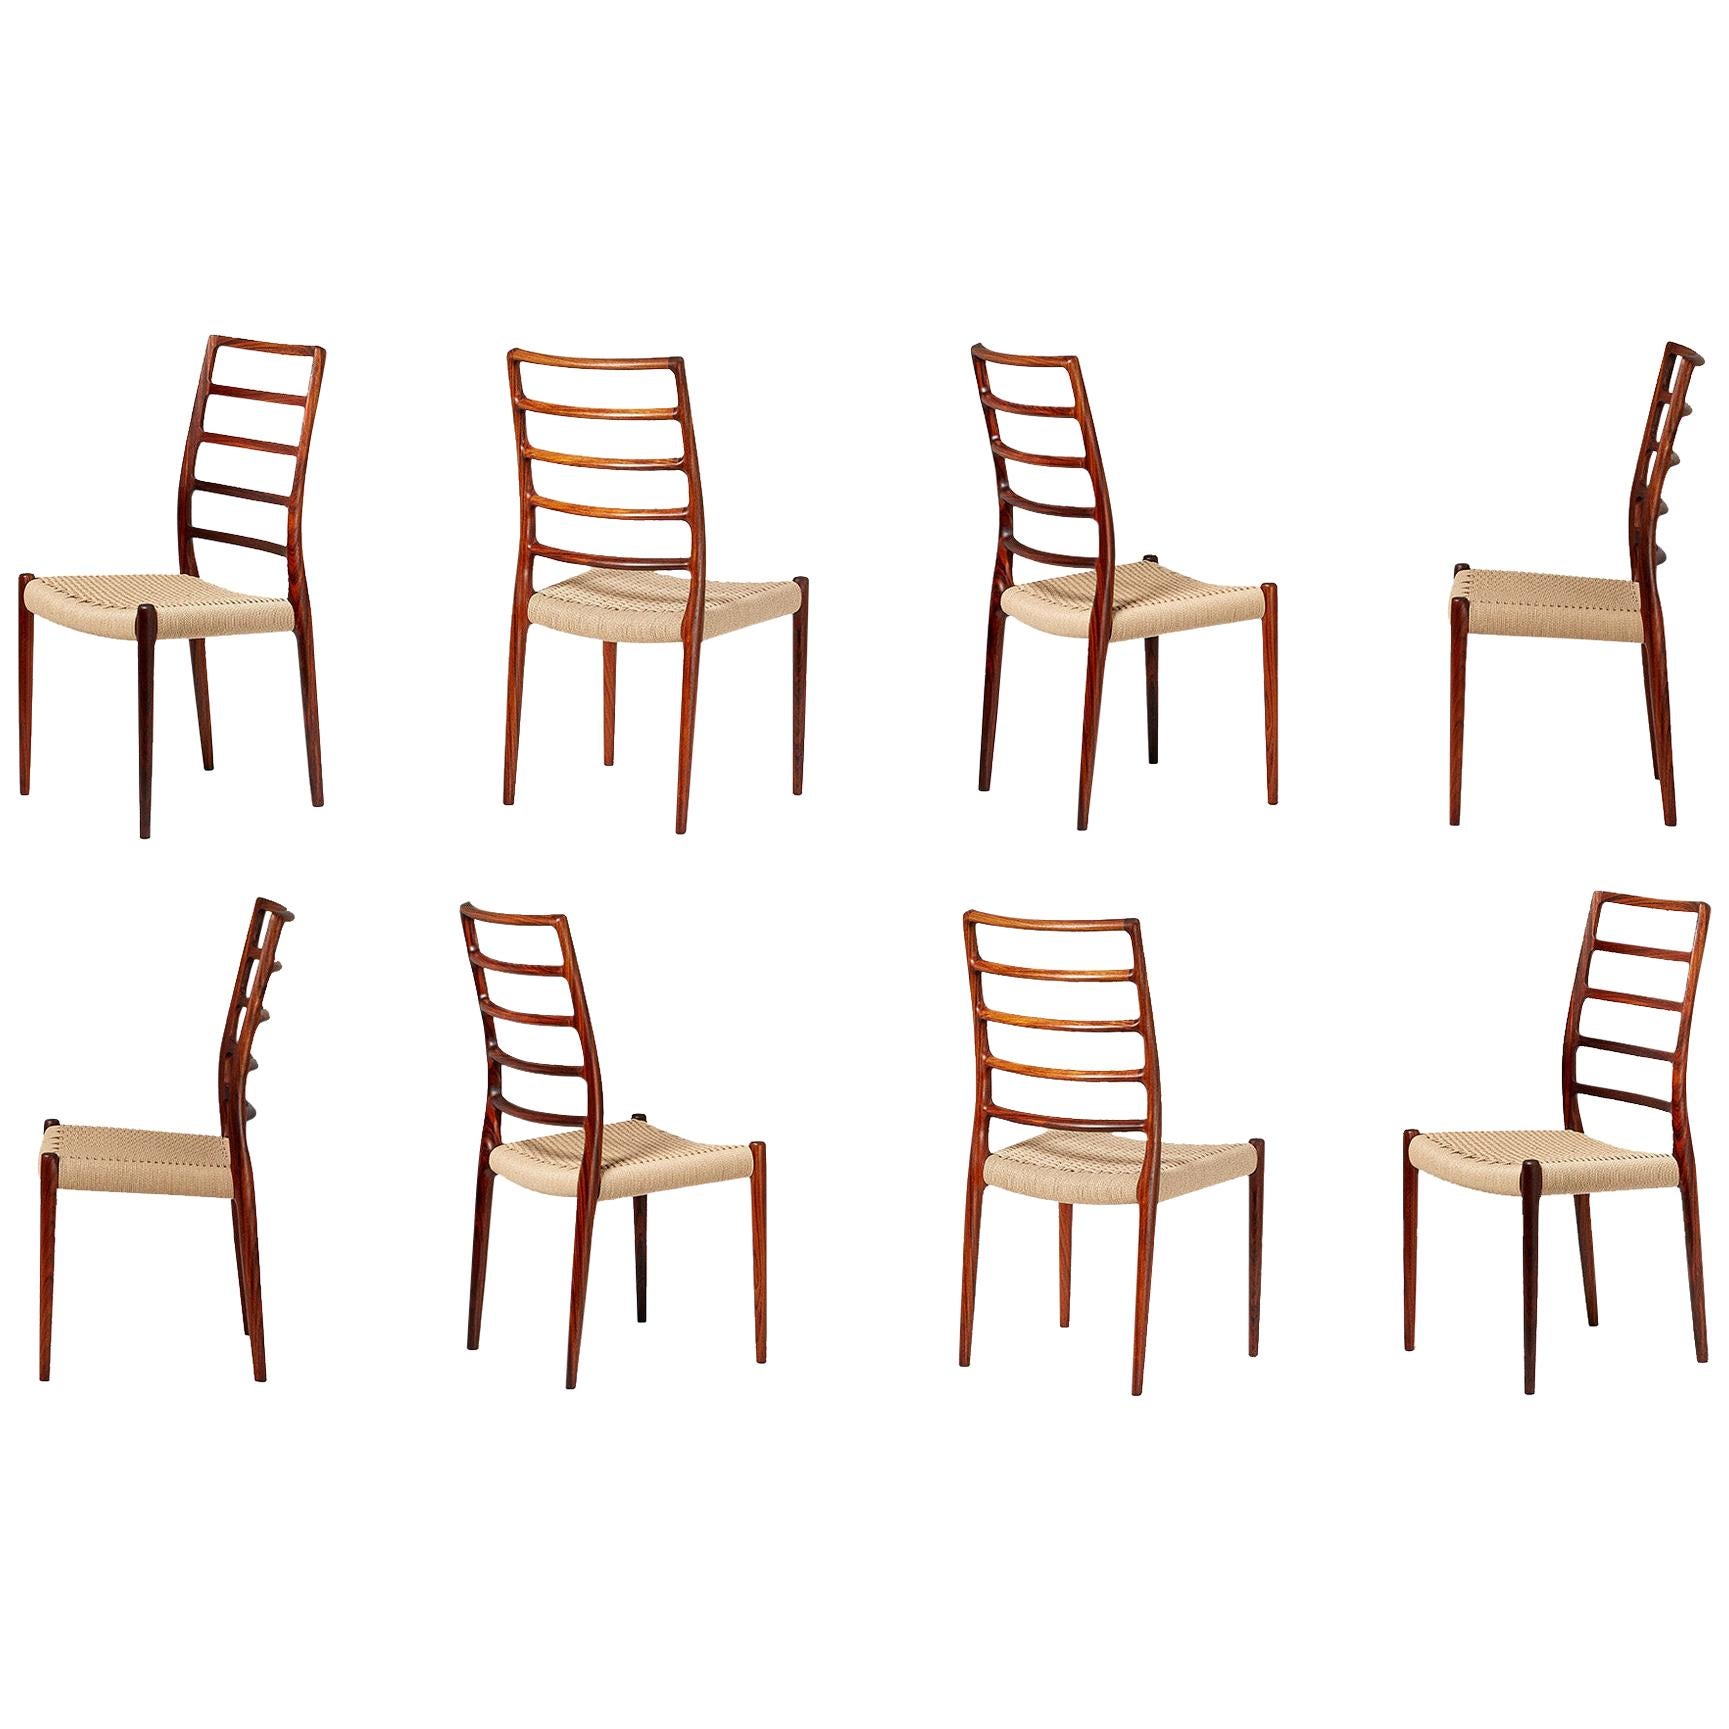 Niels Moller

Model 82 dining chairs, 1970

Set of 8 rosewood dining chairs designed by Niels O. Moller for J.L. Moller Mobelfabrik, Denmark in 1970. Features distinctive curved ladder back and new woven papercord seats. 

Larger sets